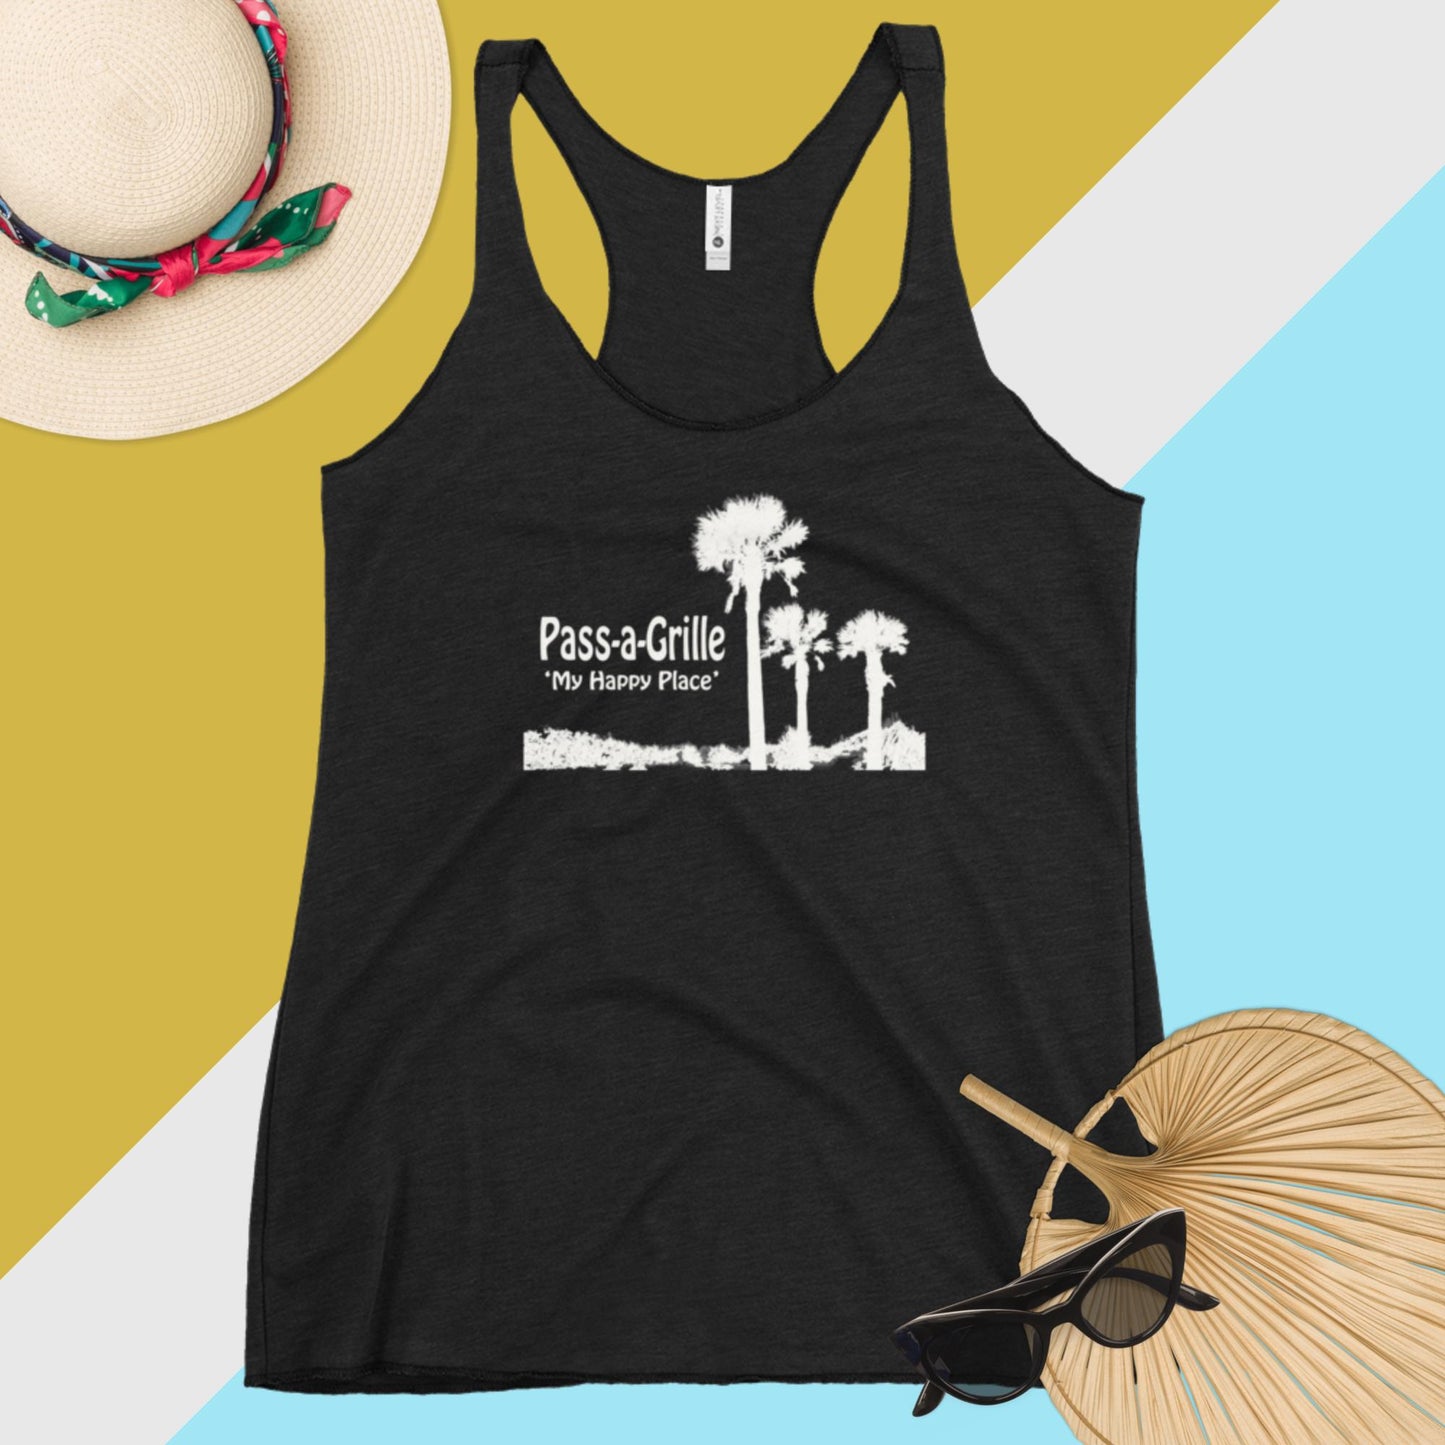 'Pass-a-Grille My Happy Place' Women's Racerback Tank